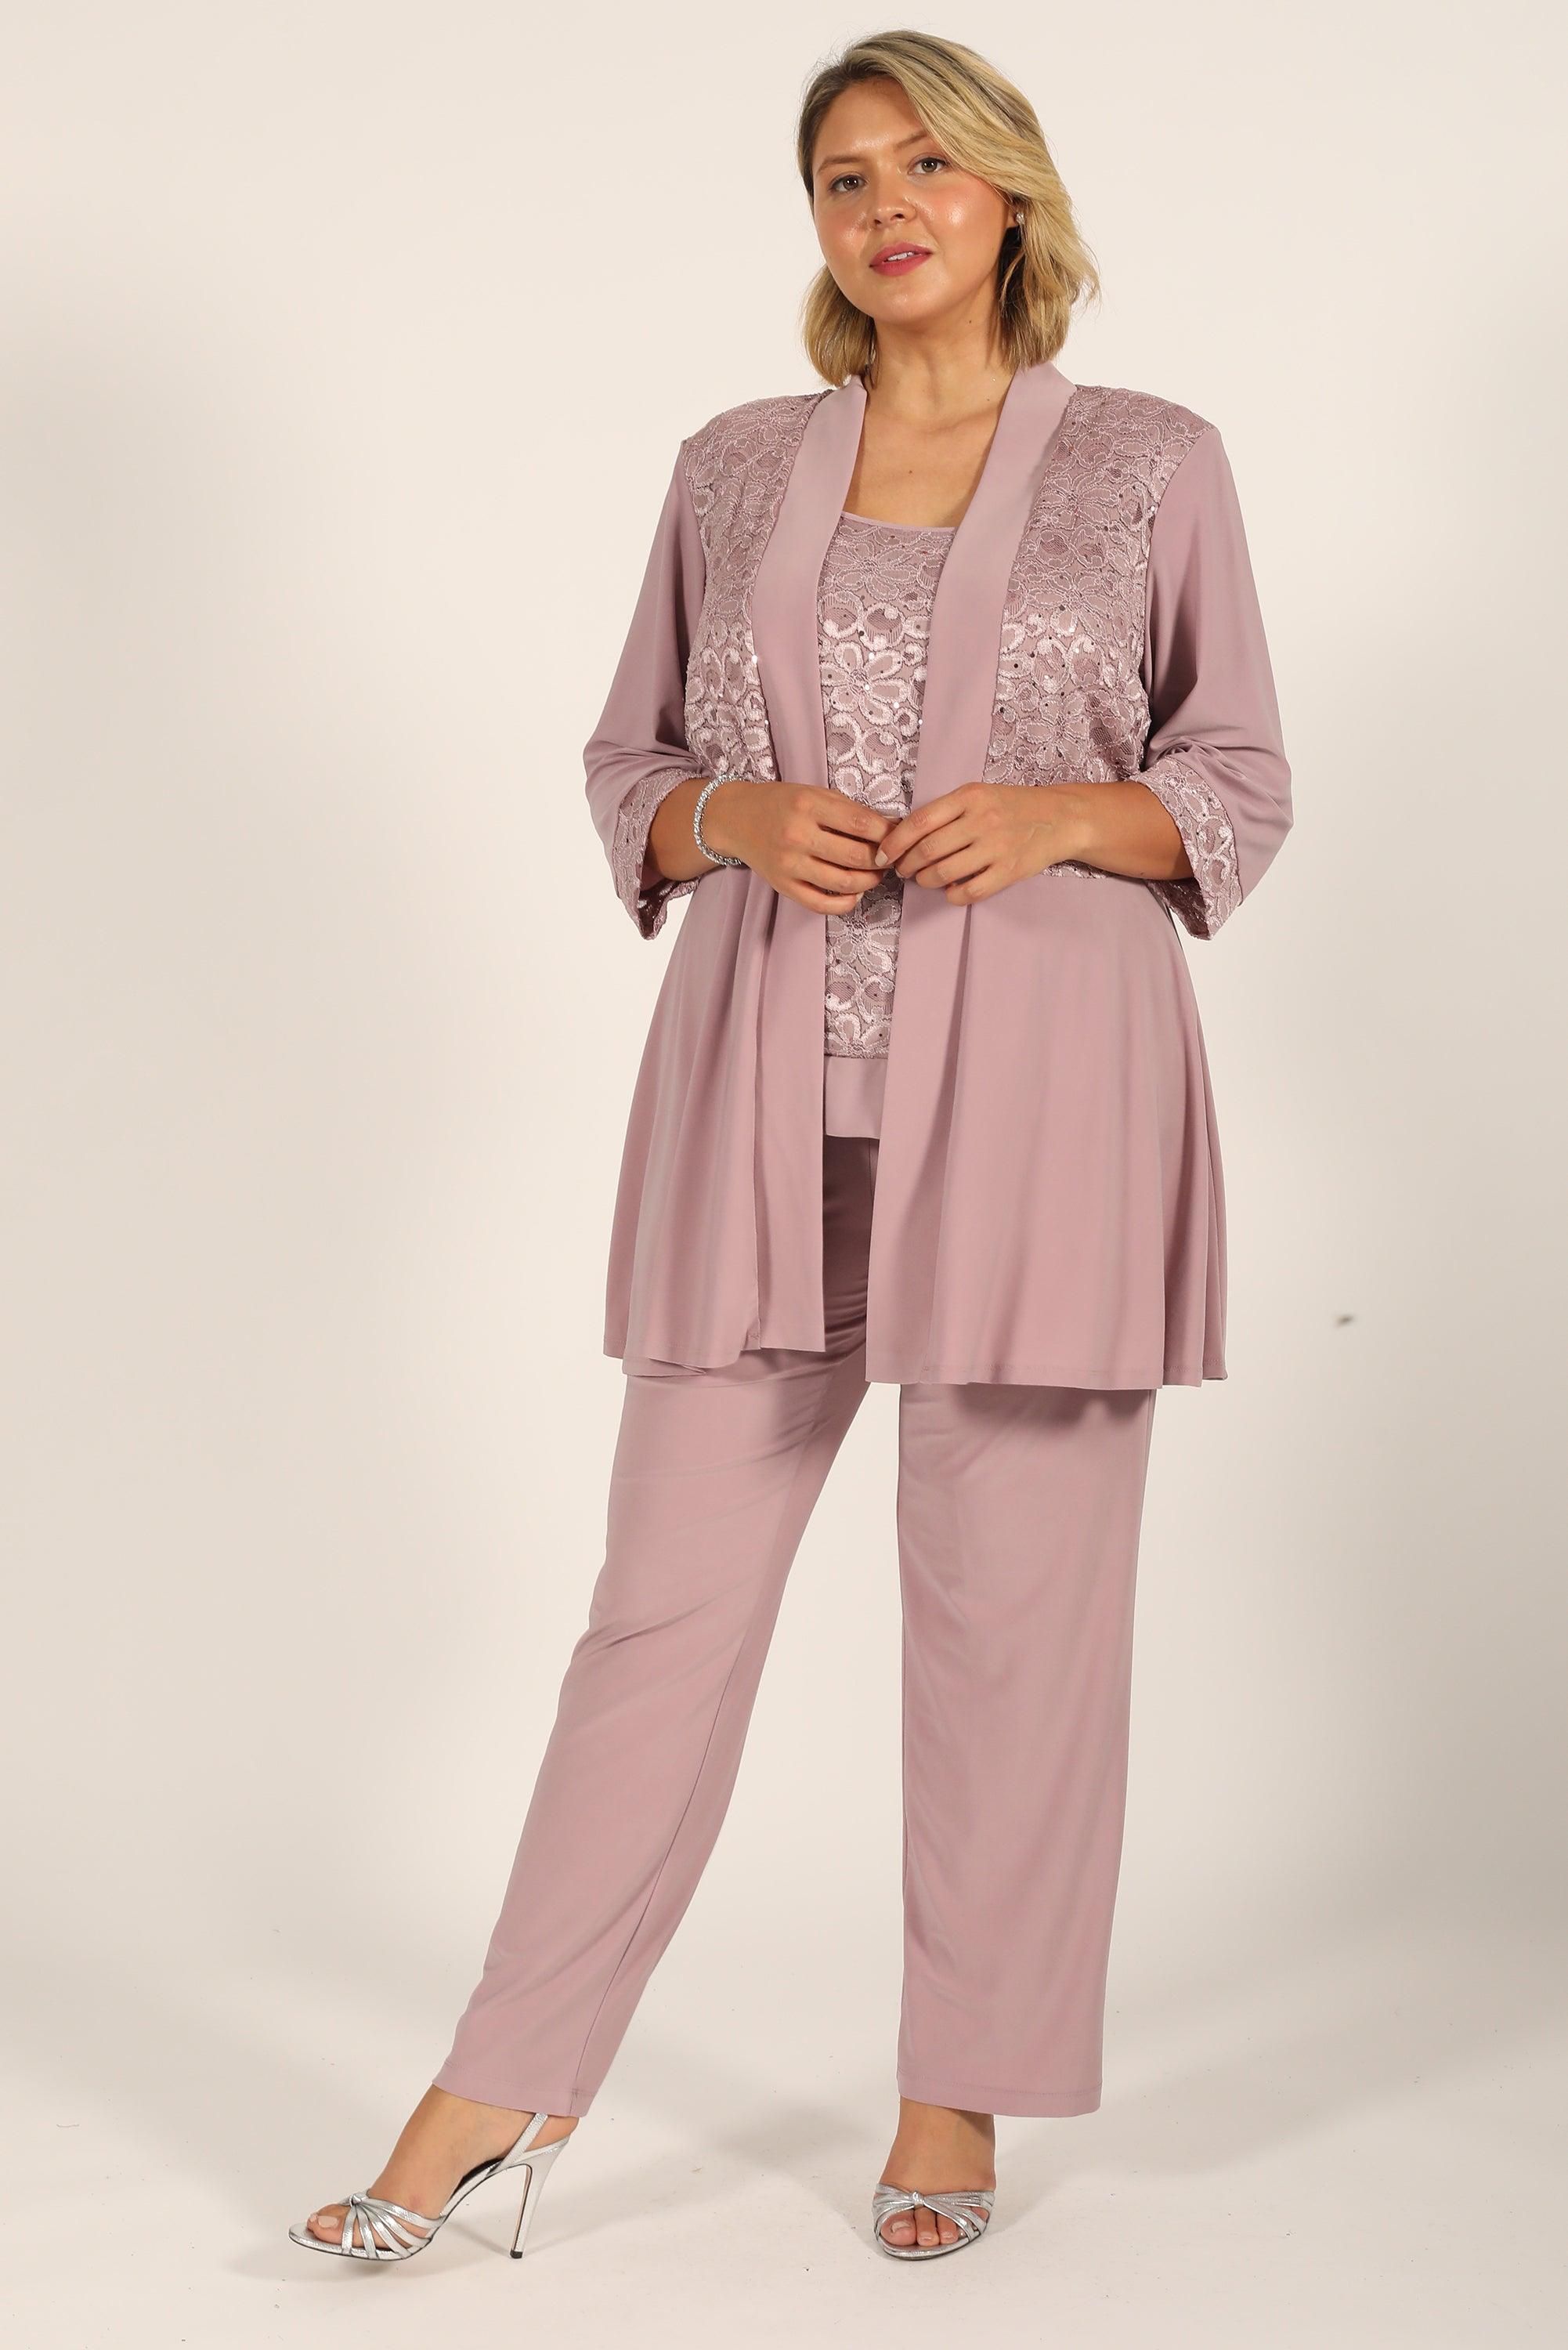 Plus size Mother of the Bride and Groom Outfits, Dresses and Trouiser suits  UK